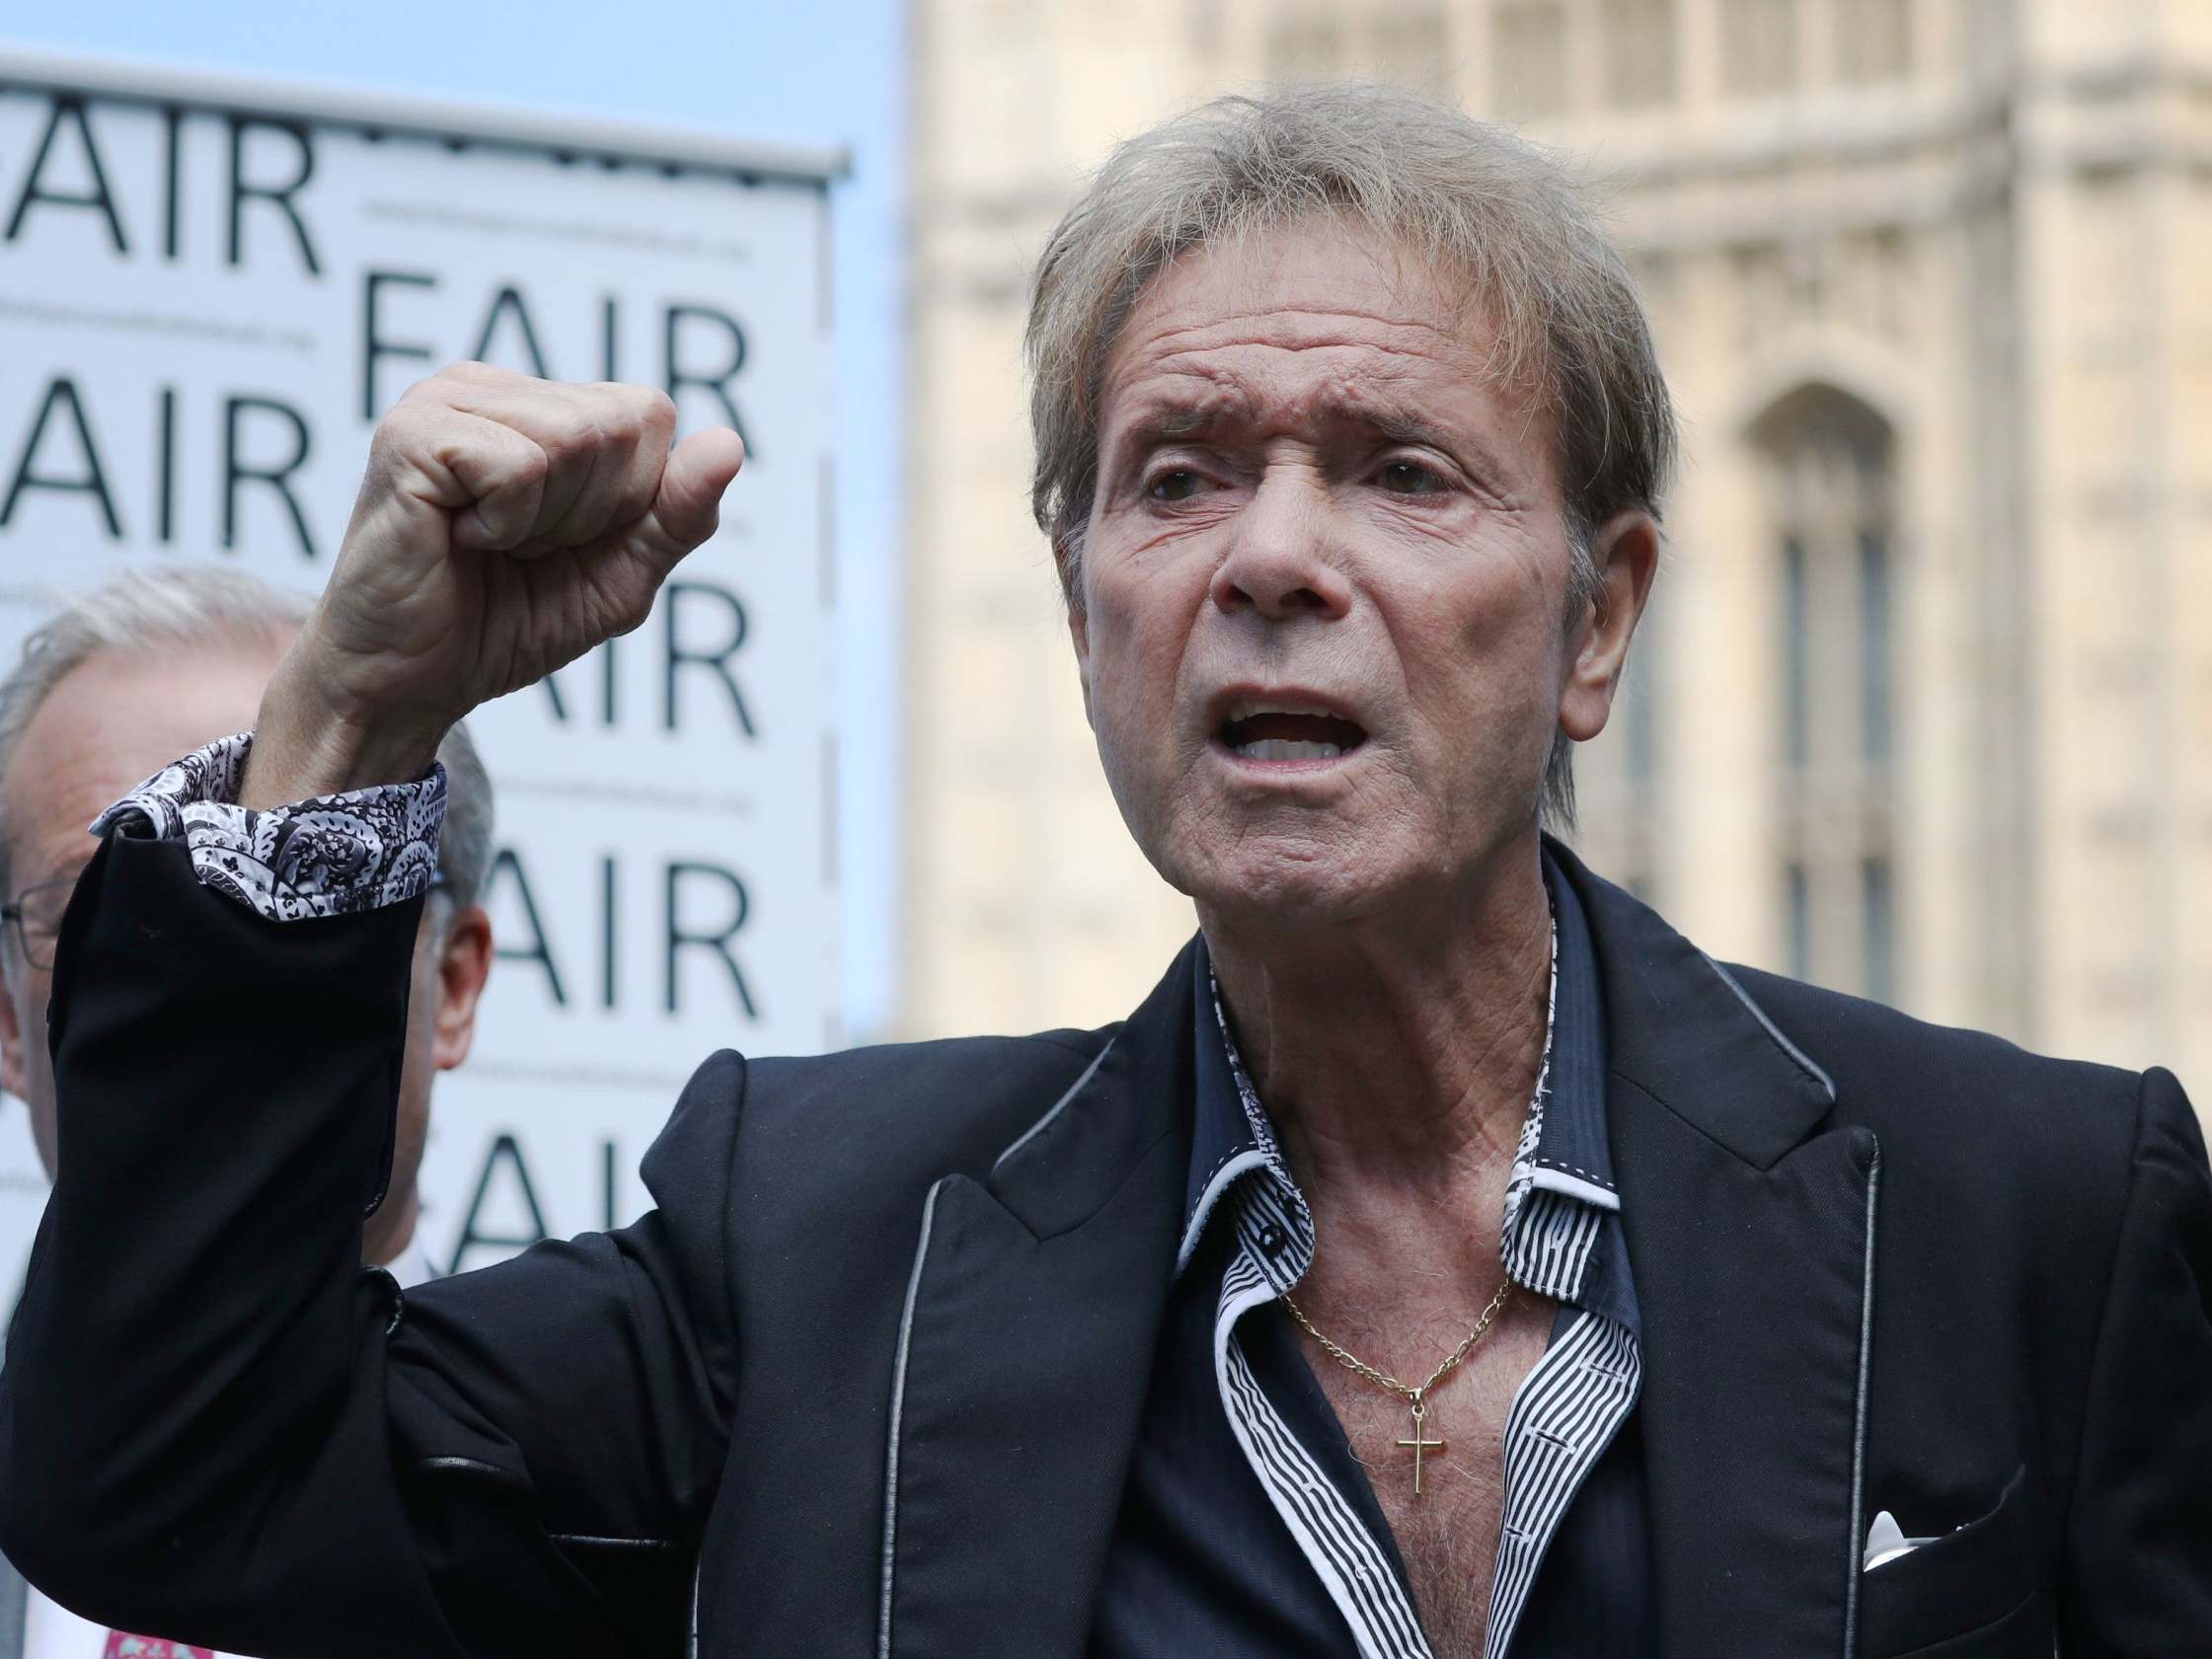 Sir Cliff Richard S Call For Anonymity In Sex Offence Arrests Would Cause Significant Harm To